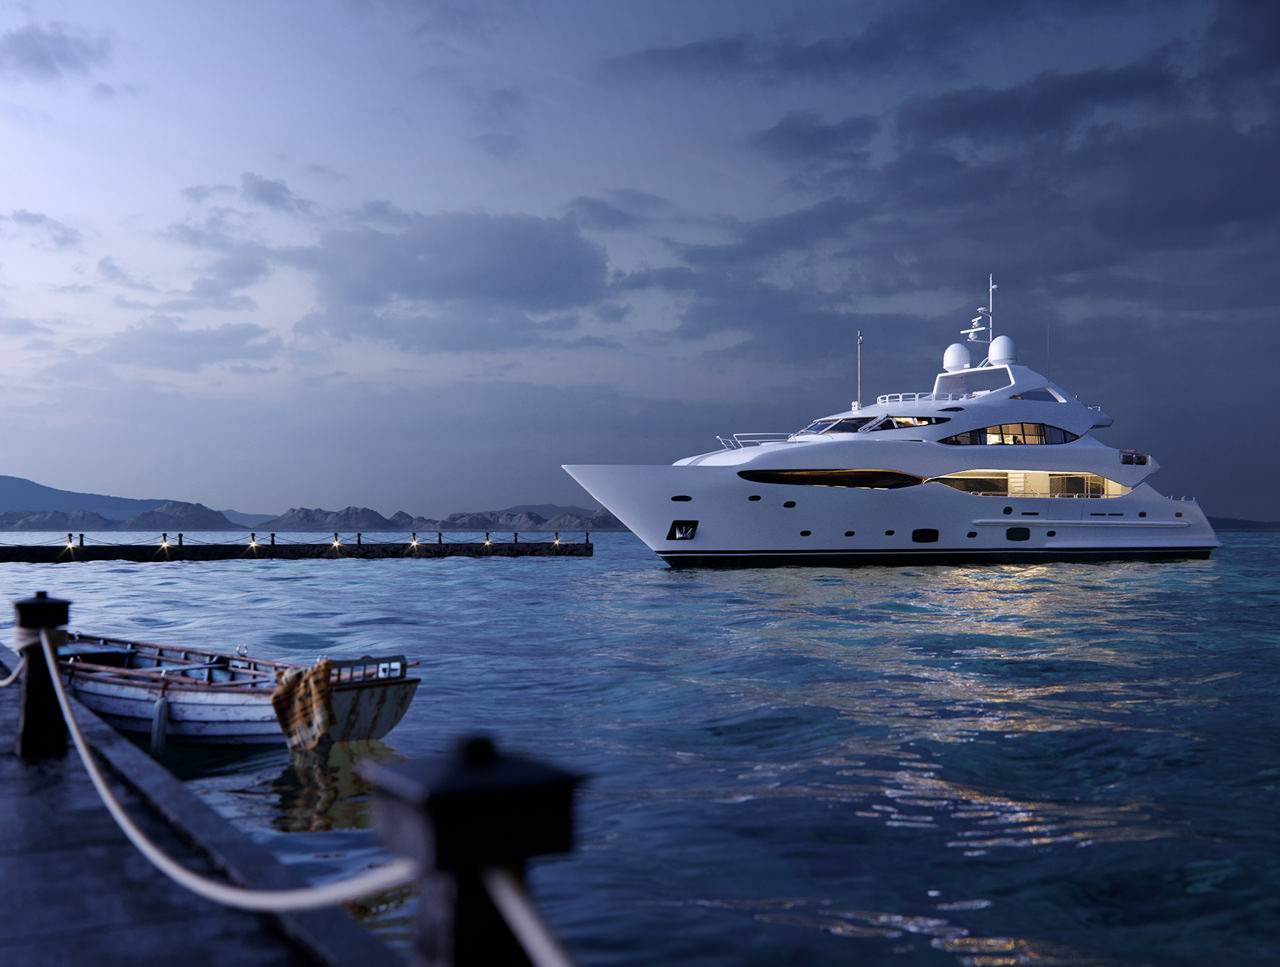 Our CGI studio offers high-end yacht and boat 3D rendering services along with animation and design